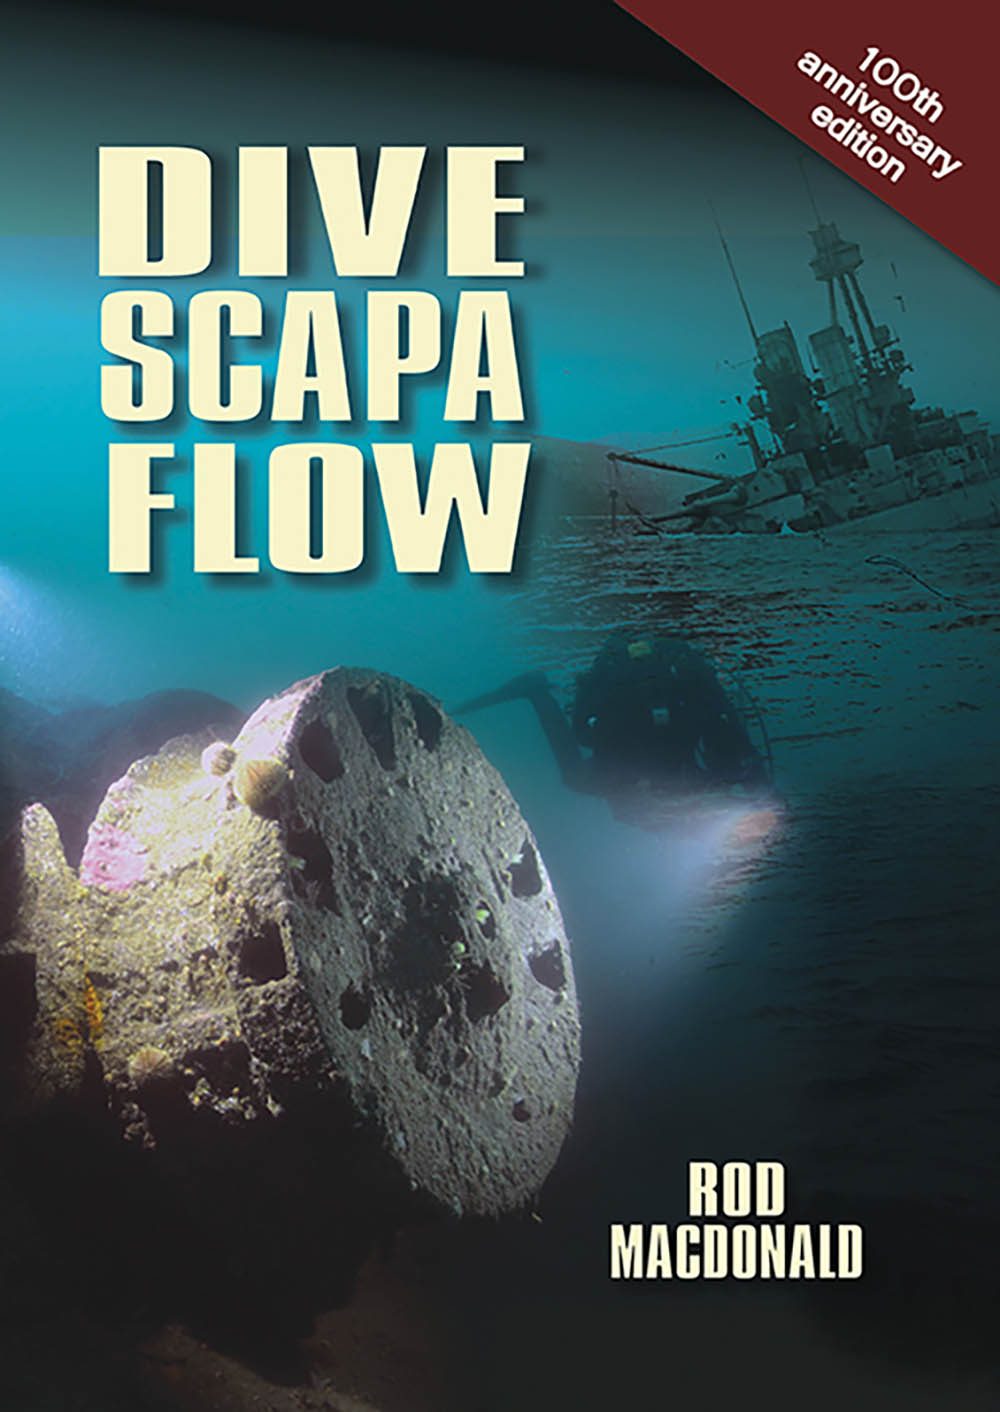 Dive Scapa Flow book cover by ROB MACDONALD